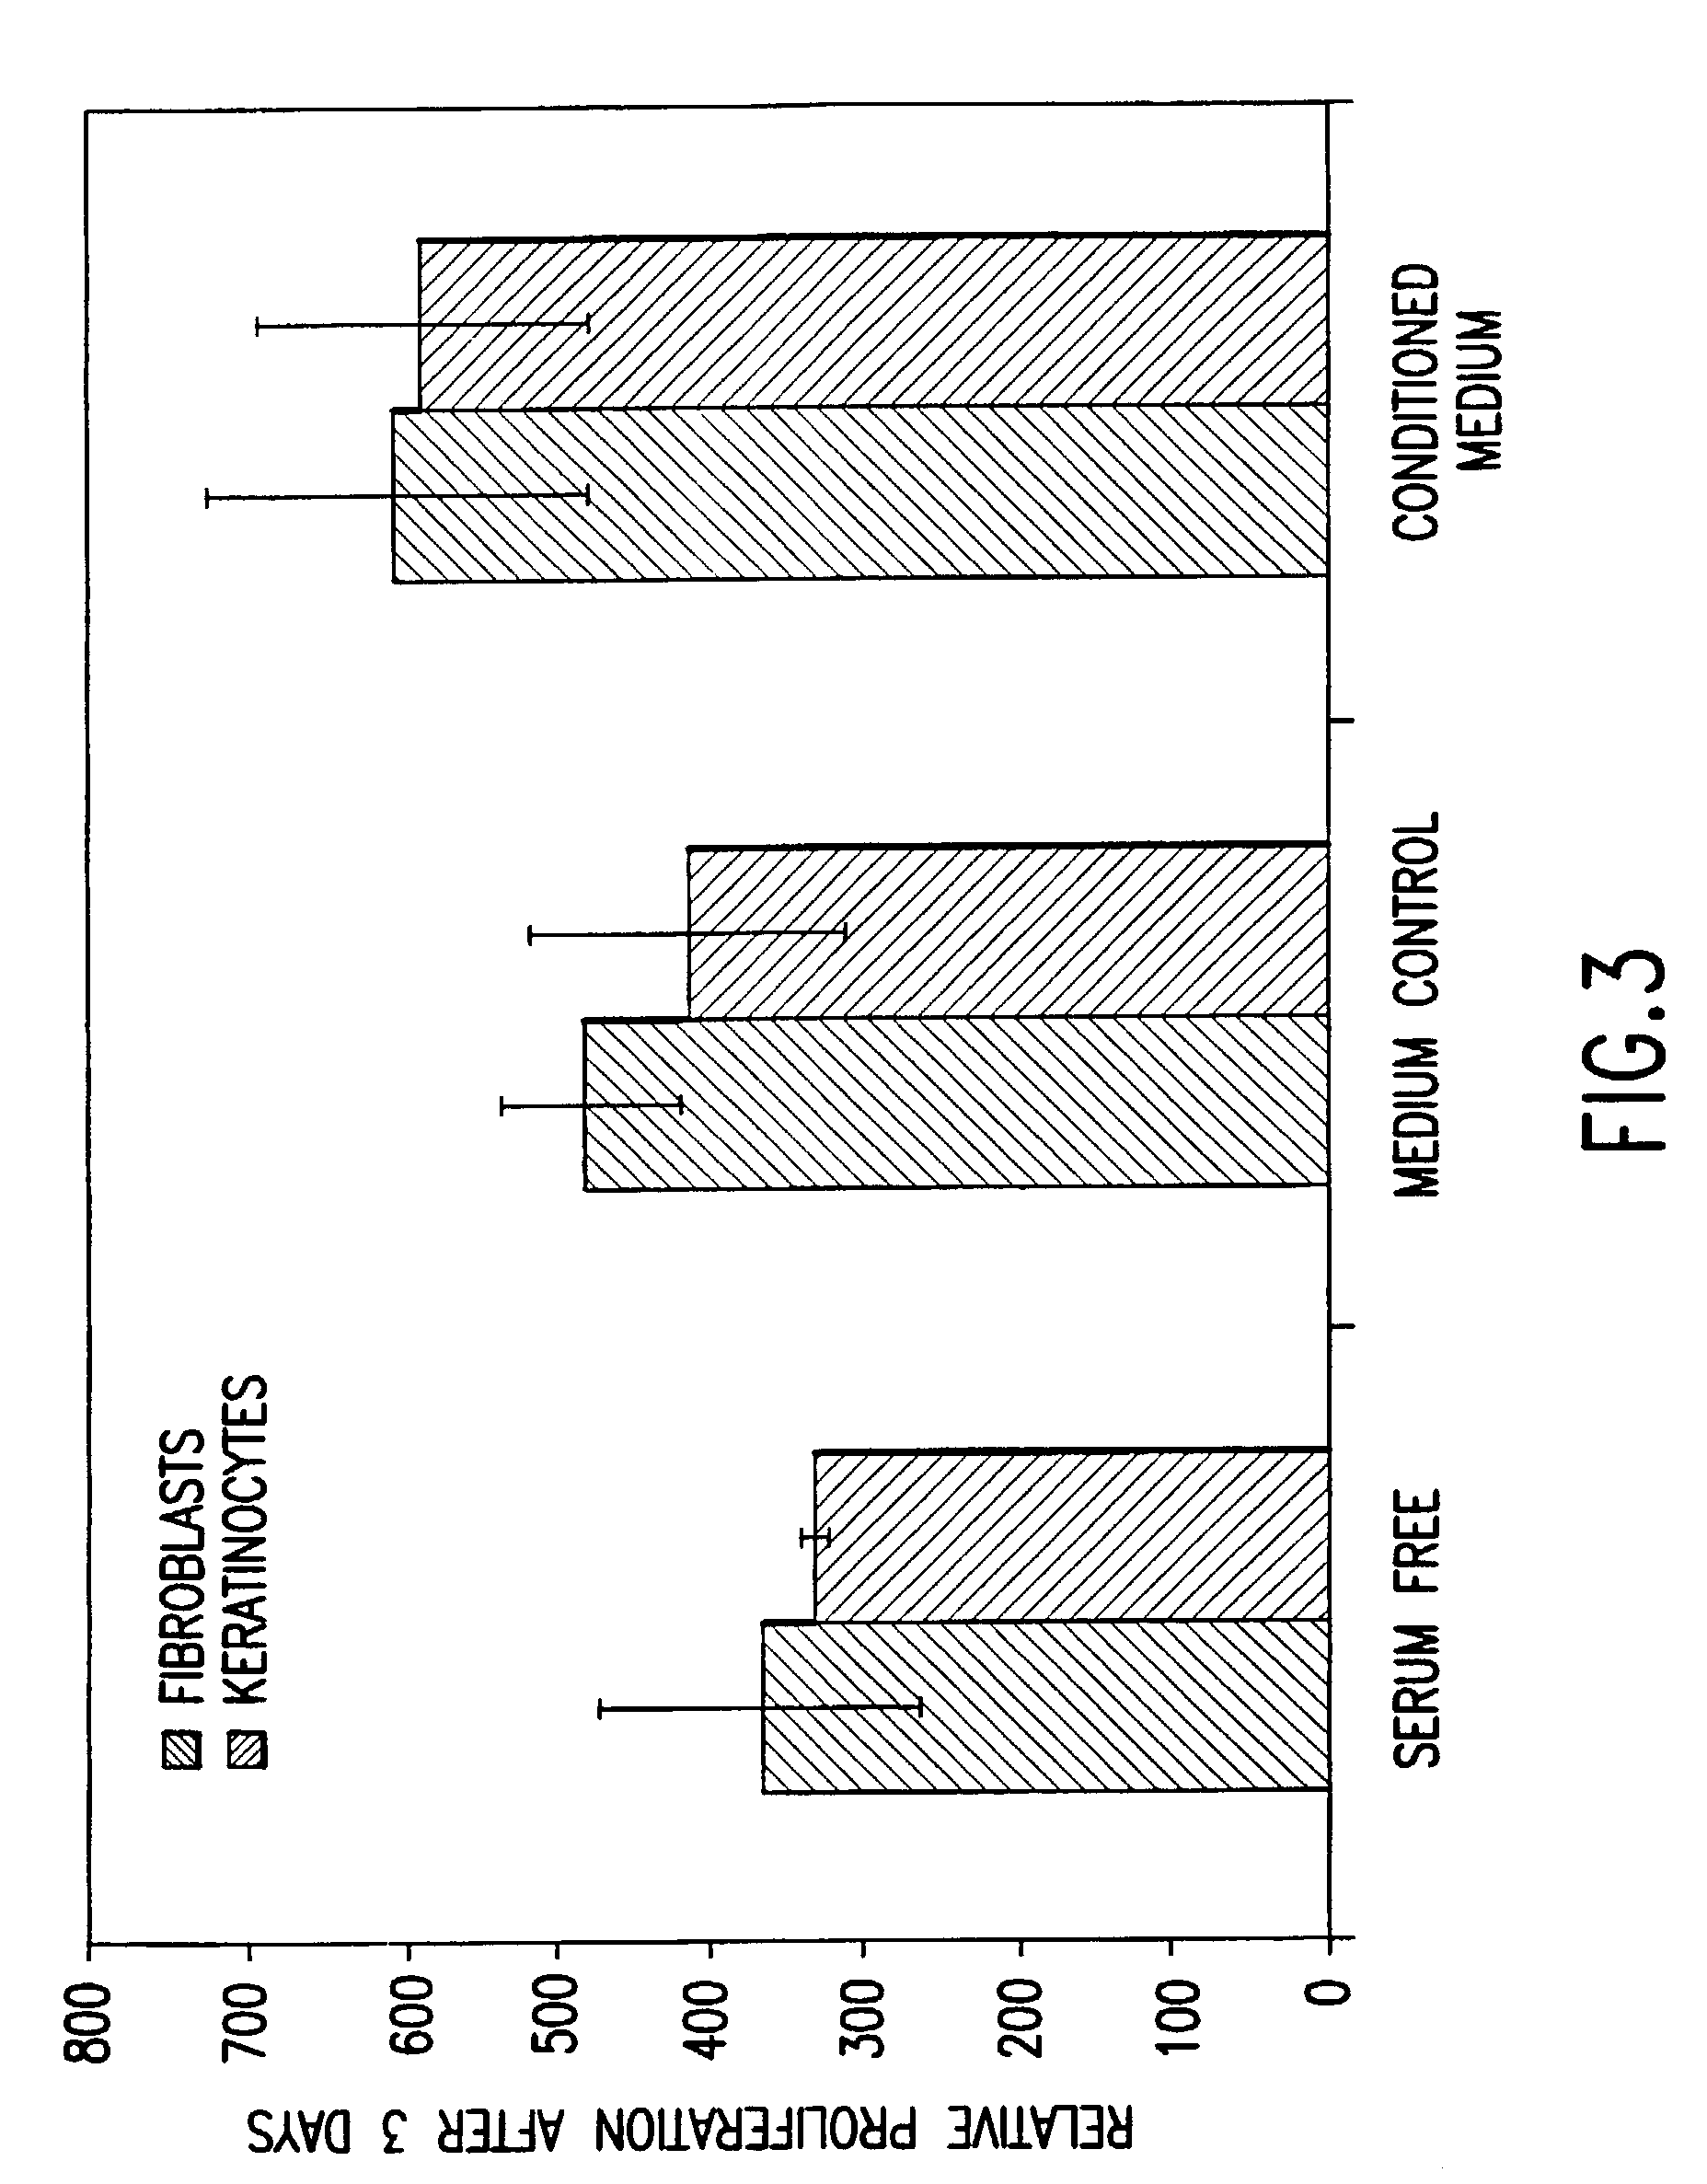 Conditioned cell culture medium compositions and methods of use